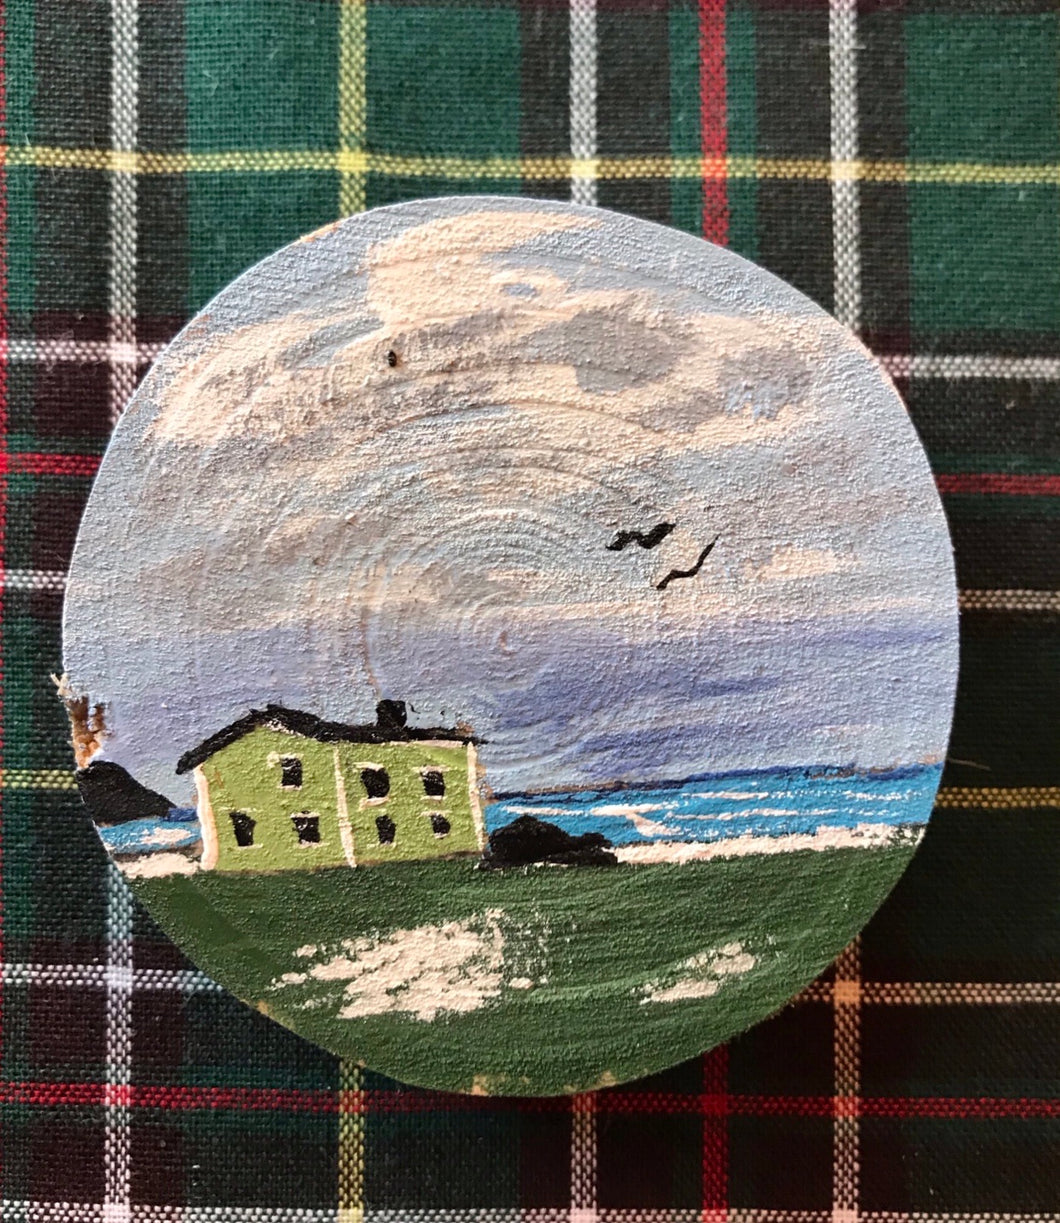 Hand painted wooden saltbox magnet